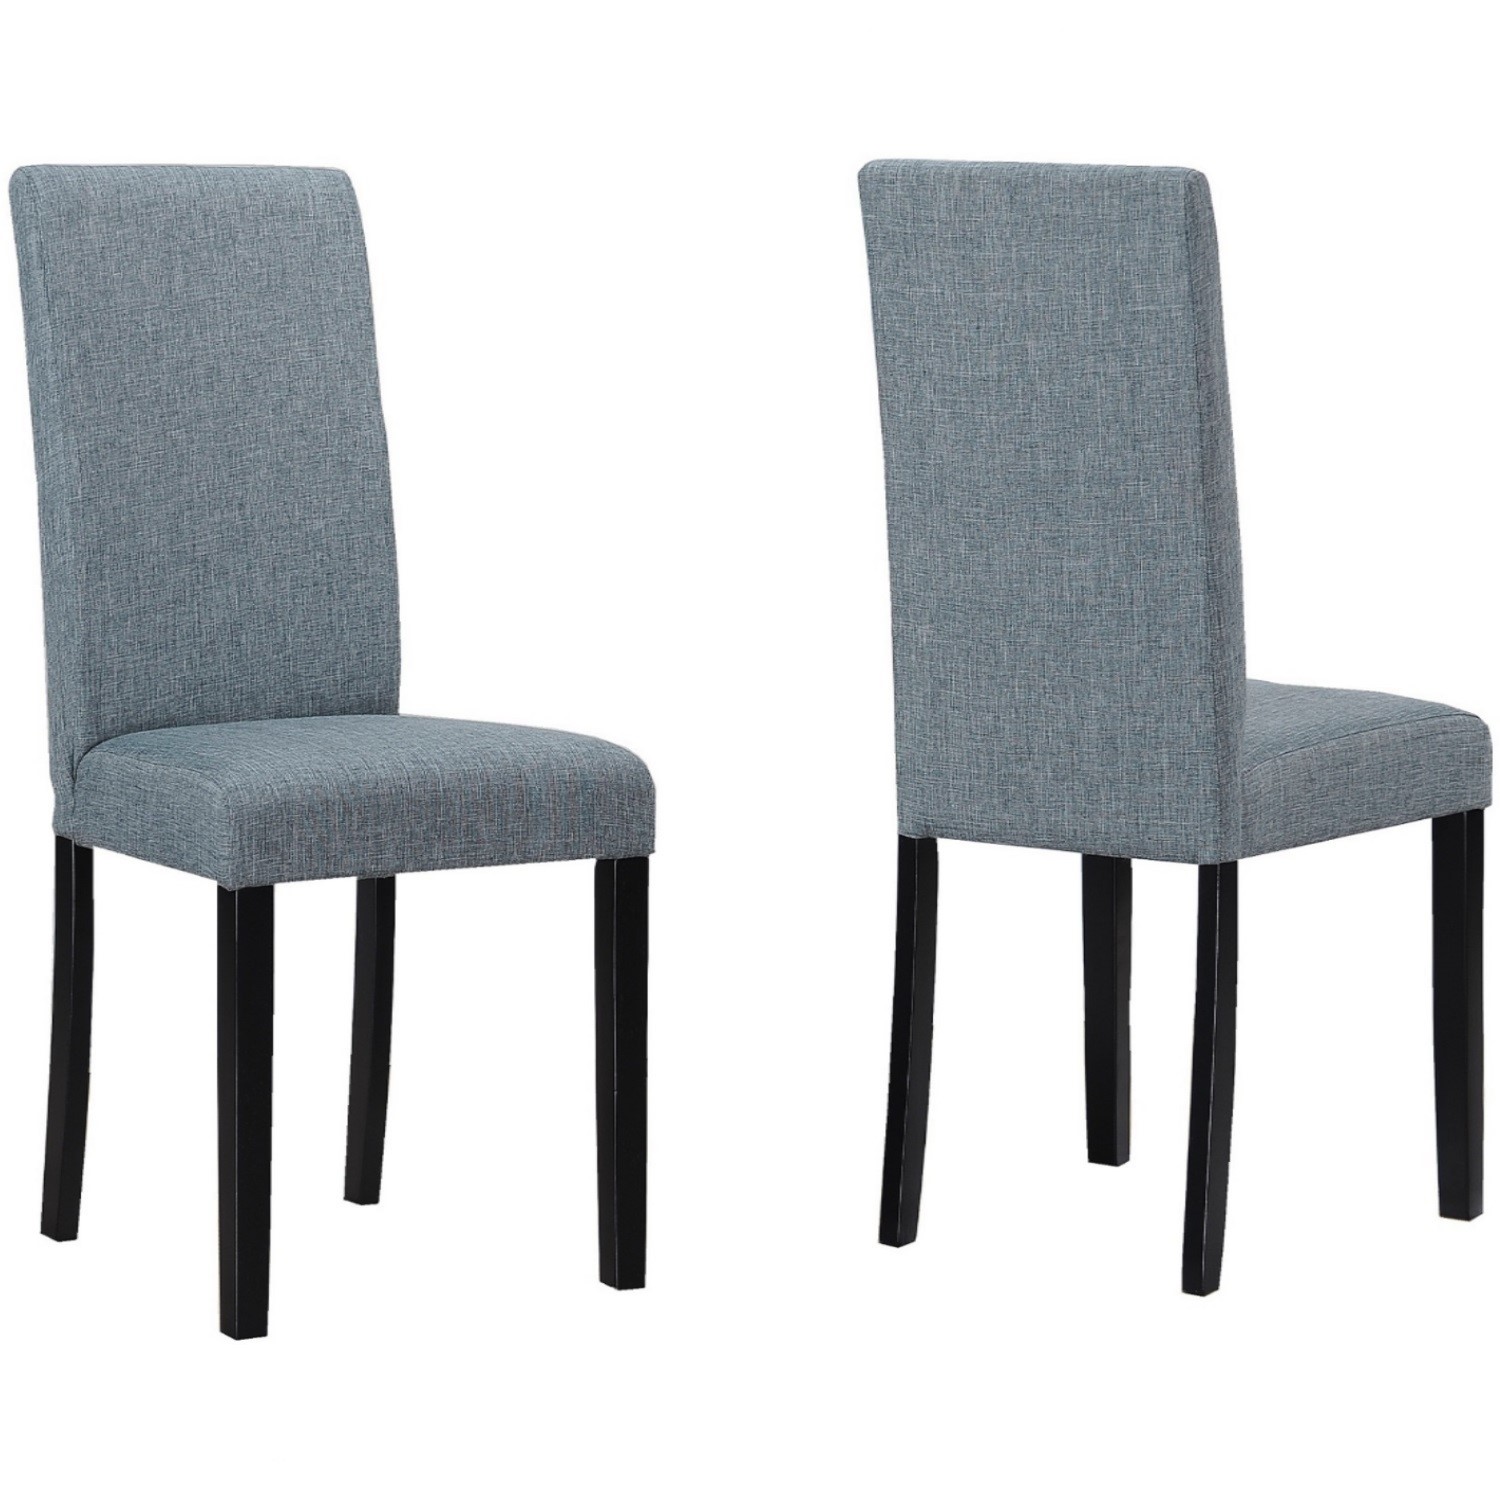 Set Of 2 Slate Grey Dining Chairs With, Grey Fabric Chair With Black Legs